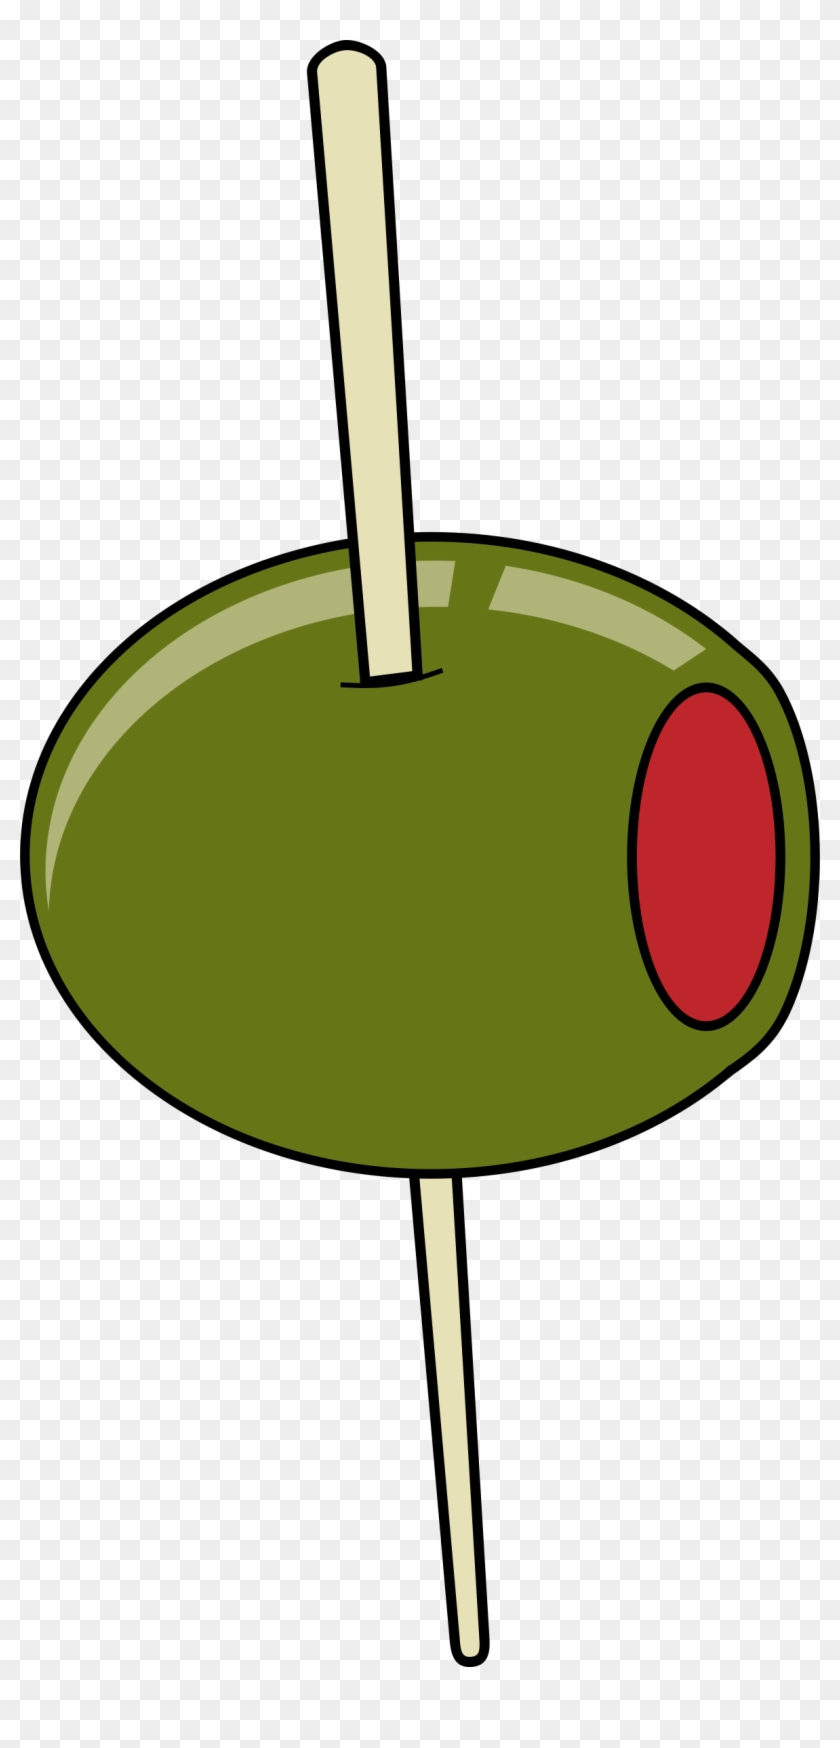 Green Olive On A Toothpick - Olive Toothpick #241662